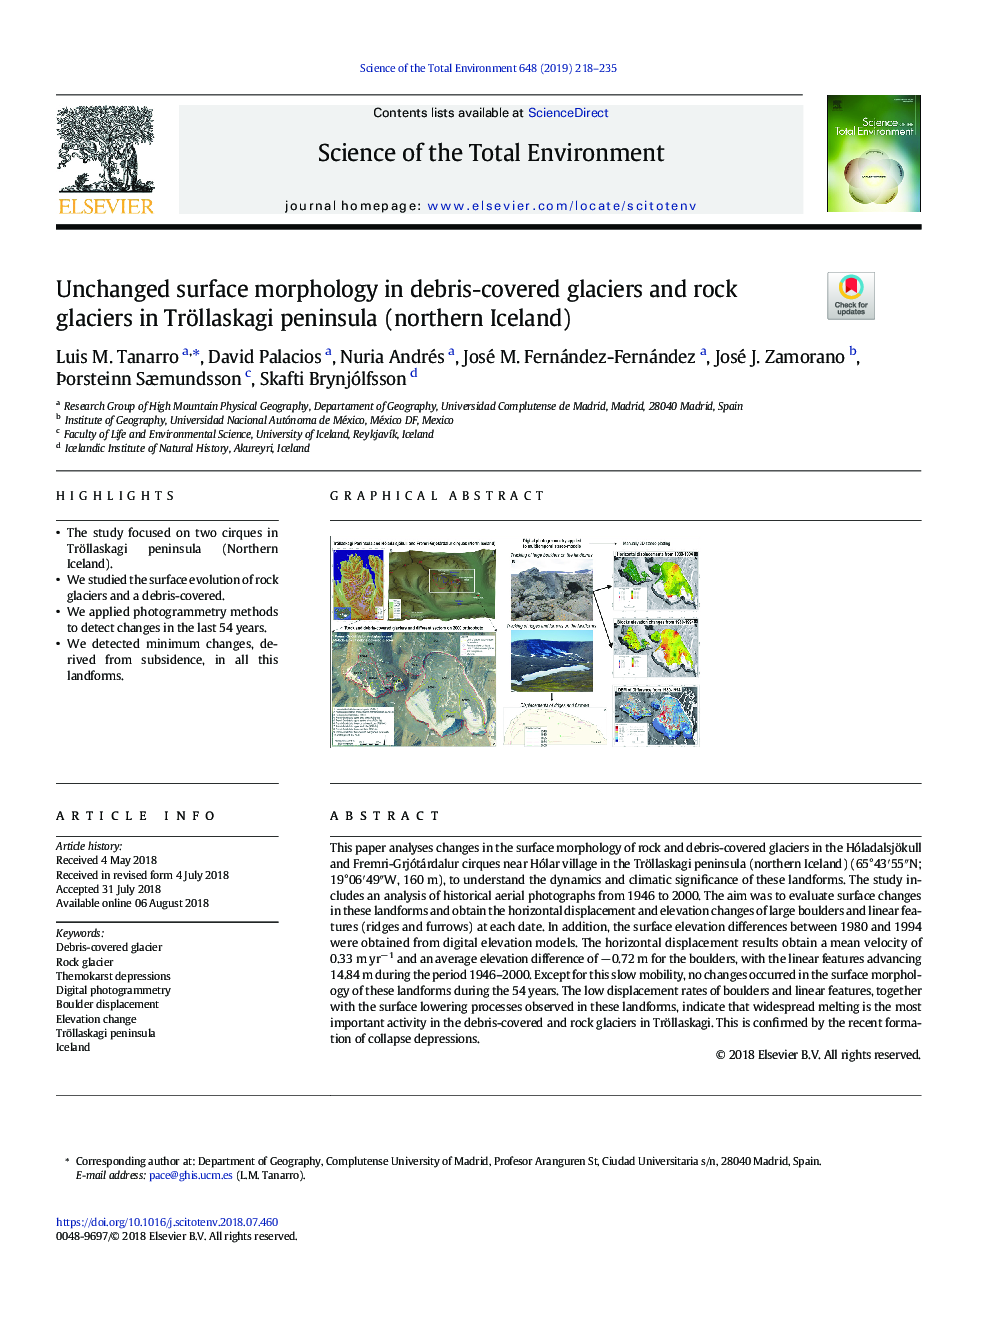 Unchanged surface morphology in debris-covered glaciers and rock glaciers in Tröllaskagi peninsula (northern Iceland)